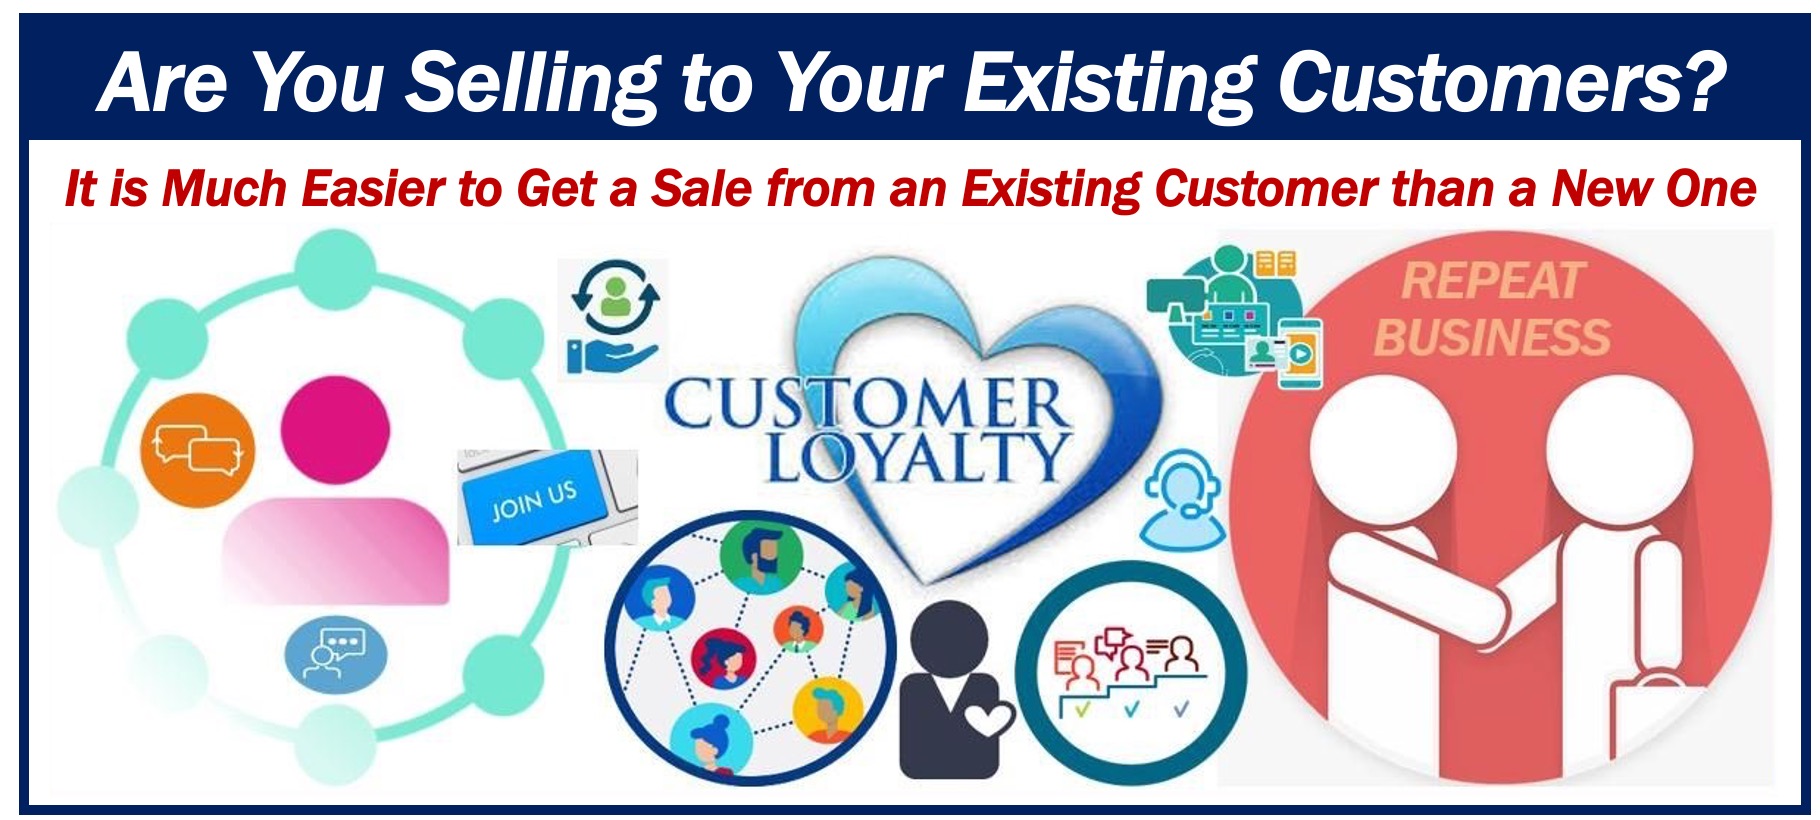 Selling to existing customers - Iterate